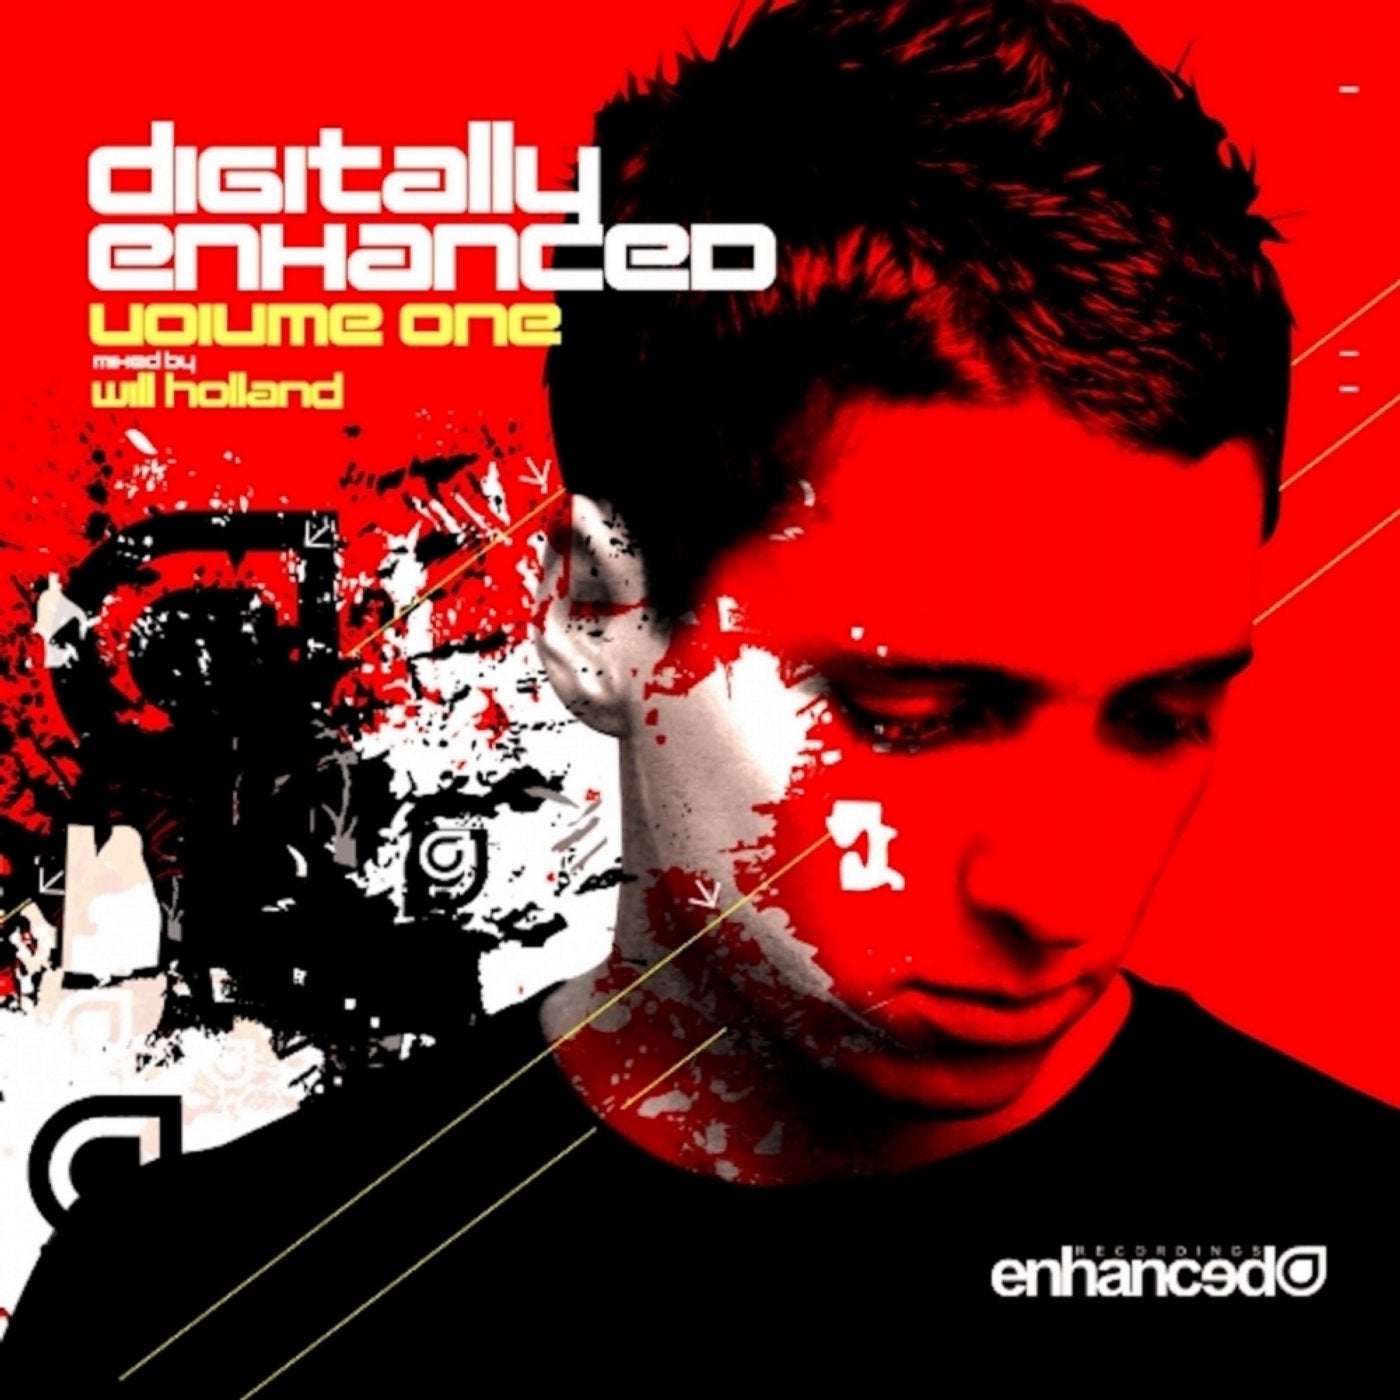 Digitally Enhanced Volume One, Mixed By Will Holland